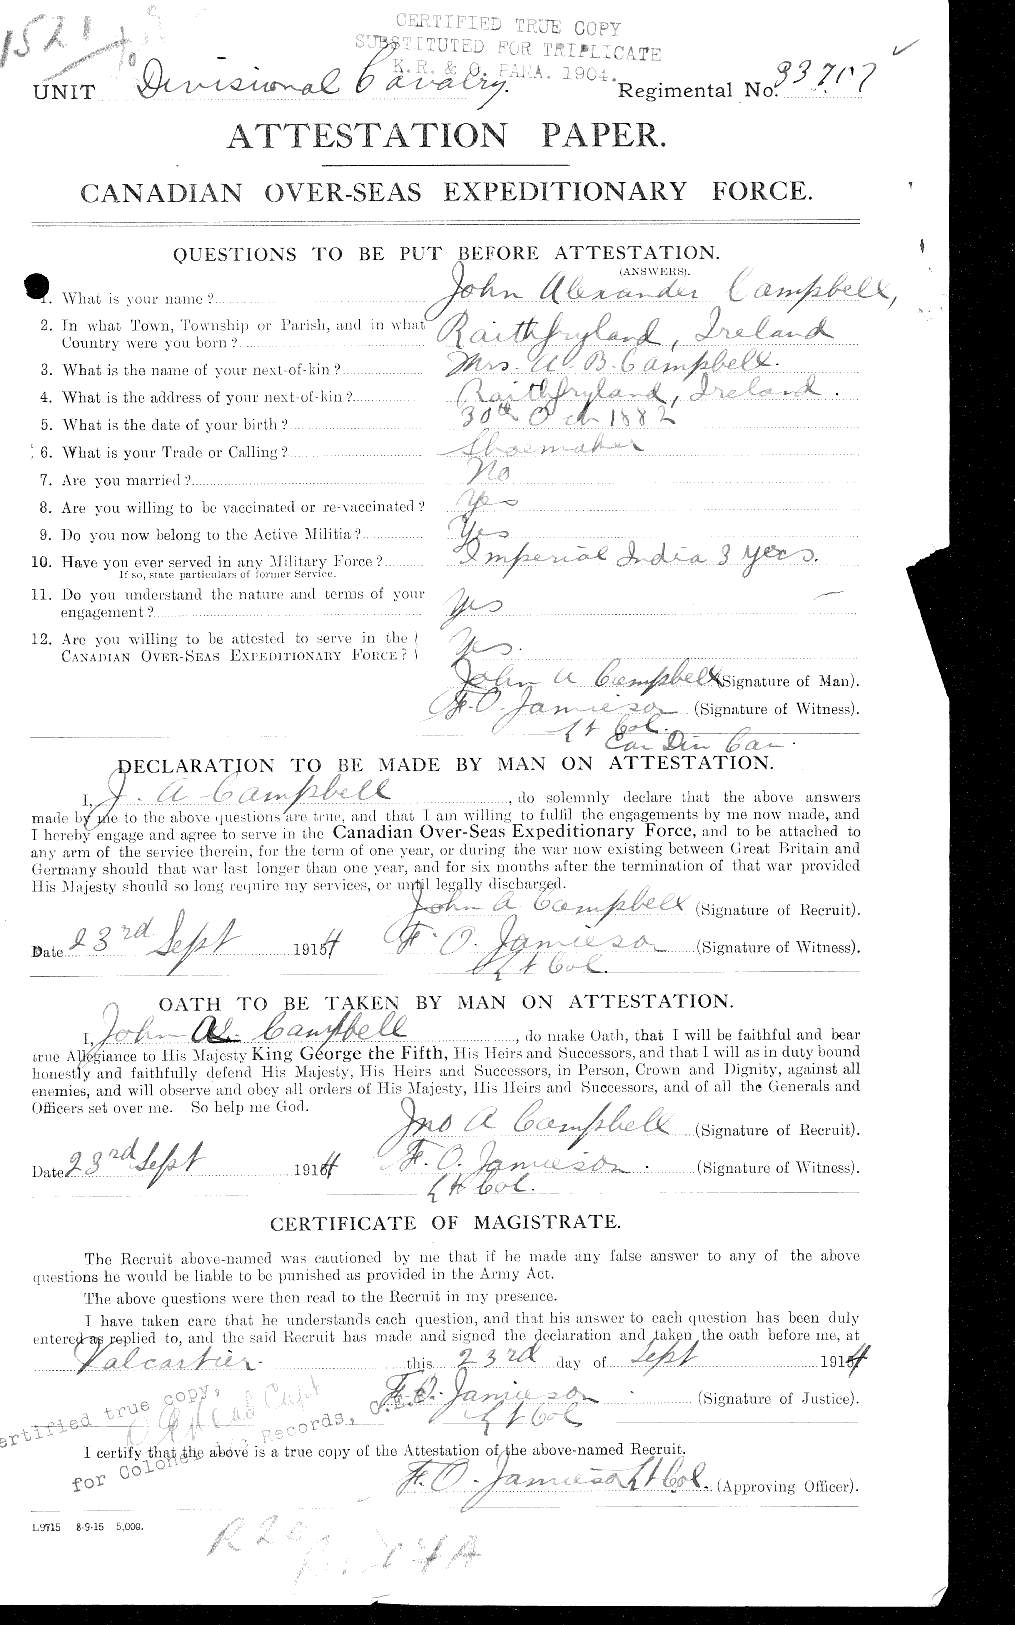 Personnel Records of the First World War - CEF 006852a